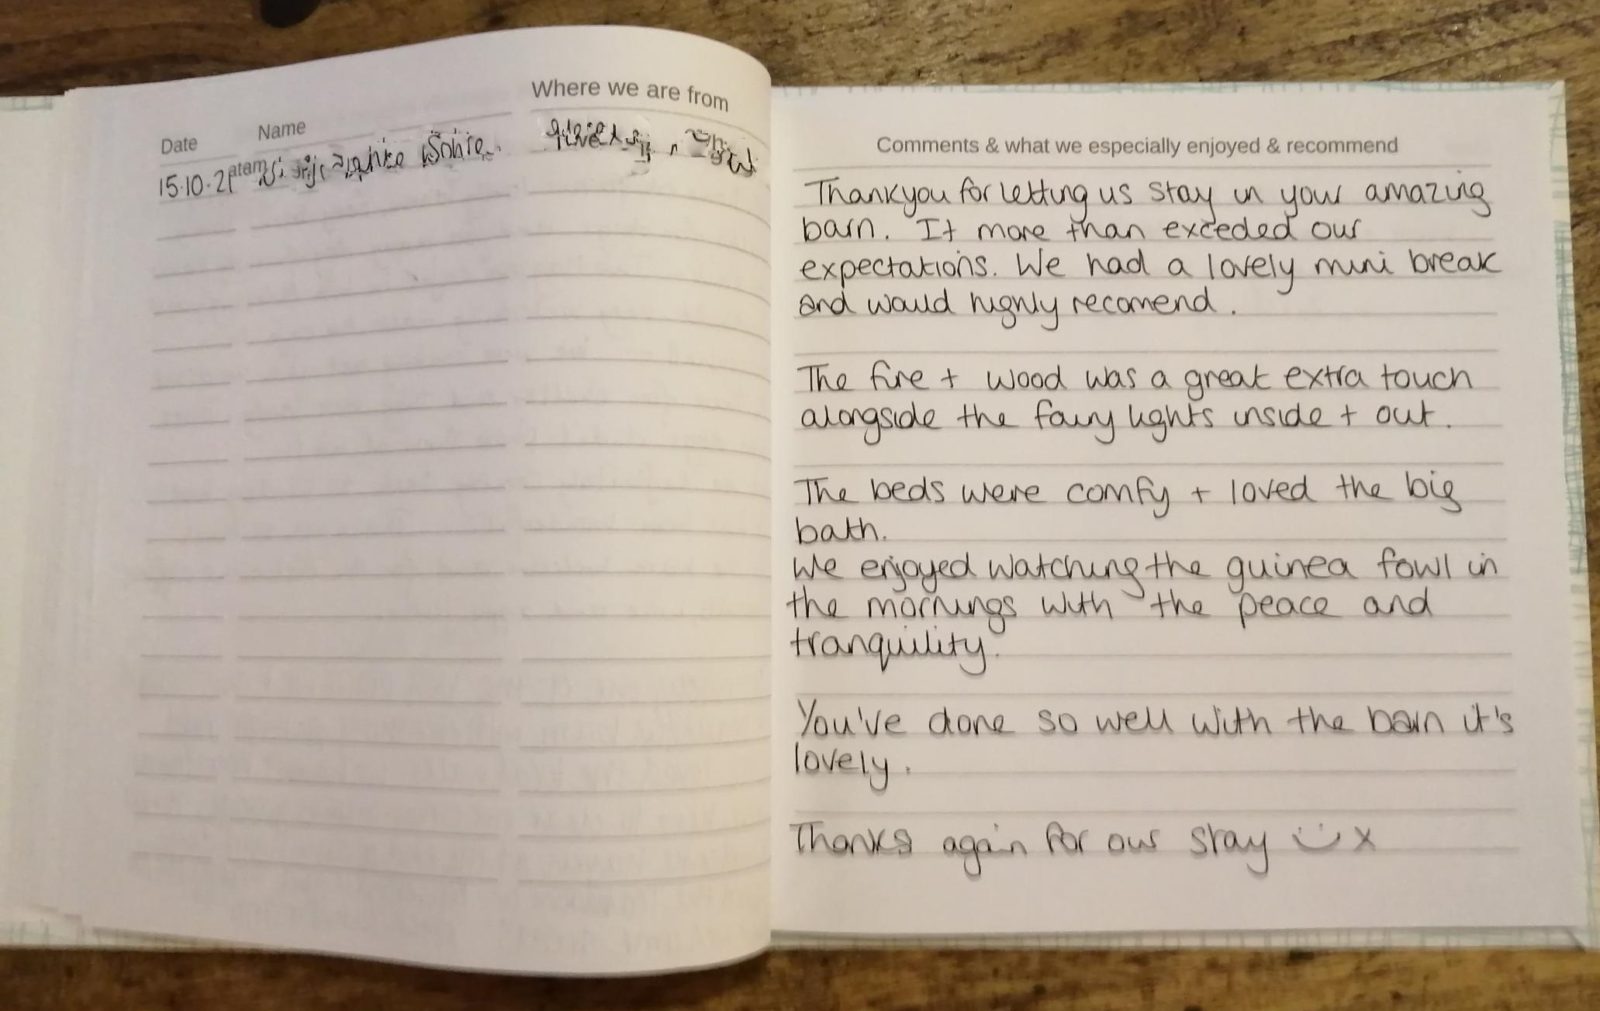 Manor House Barn Visitor Book